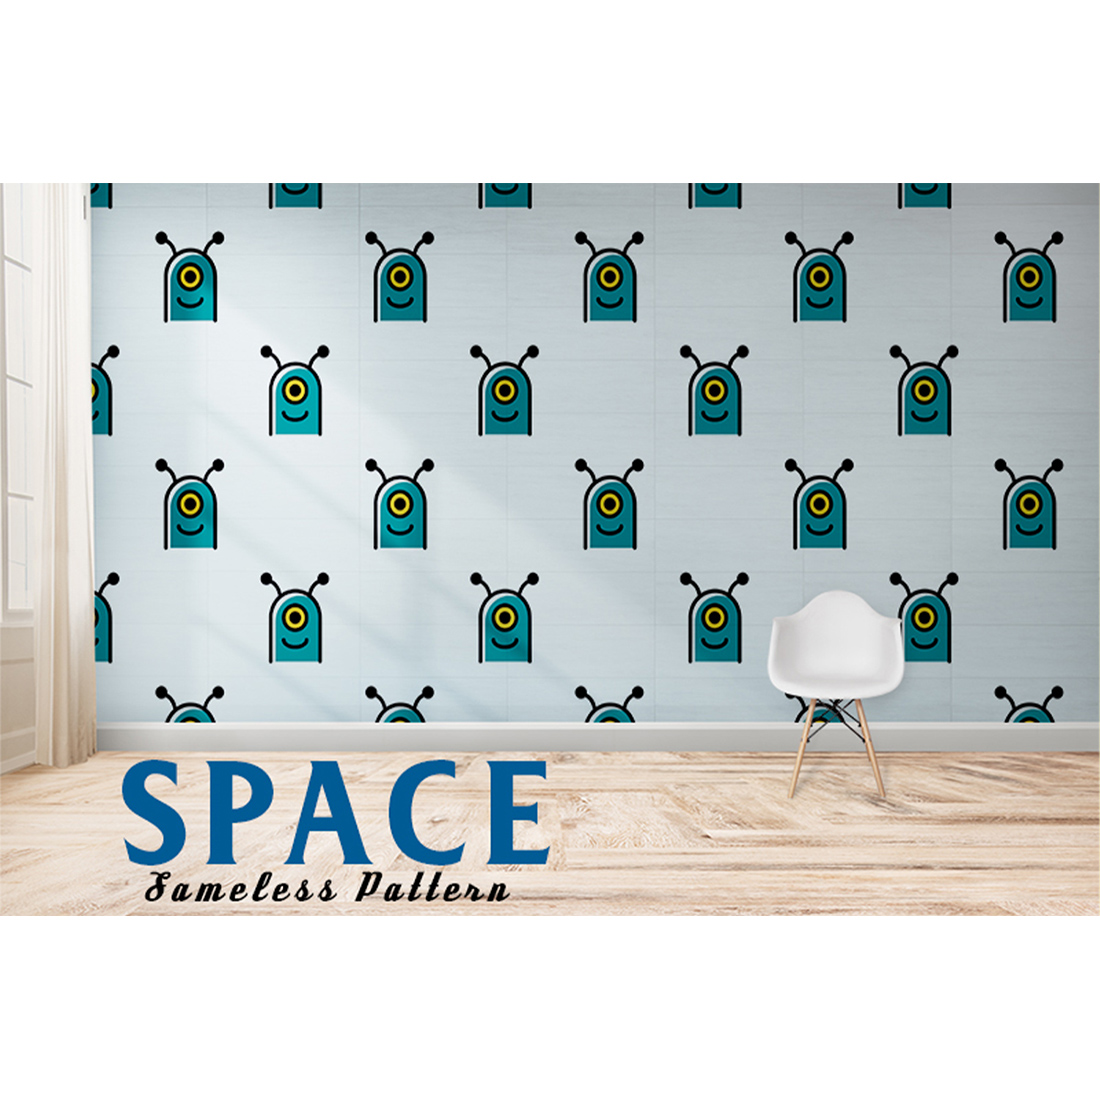 Image with enchanting patterns on the theme of space